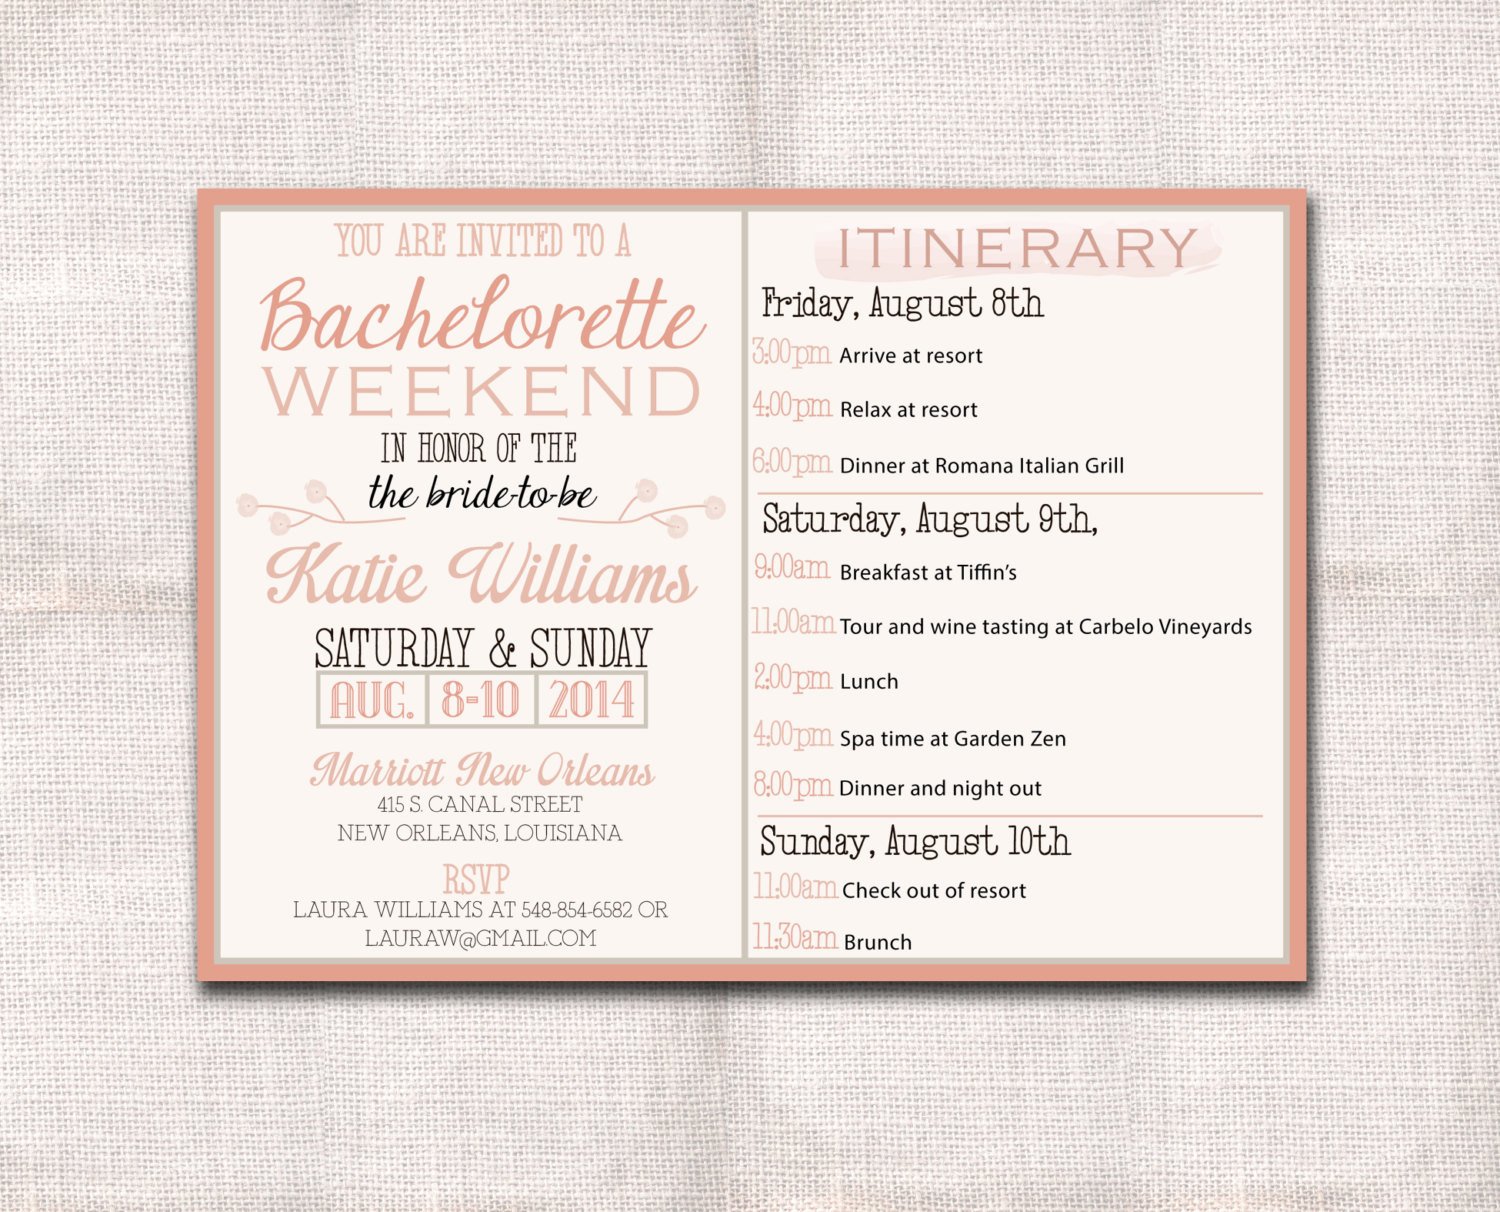 Bachelorette Party Itinerary Template Inspirational Bachelorette Party Weekend Invitation and Itinerary Custom